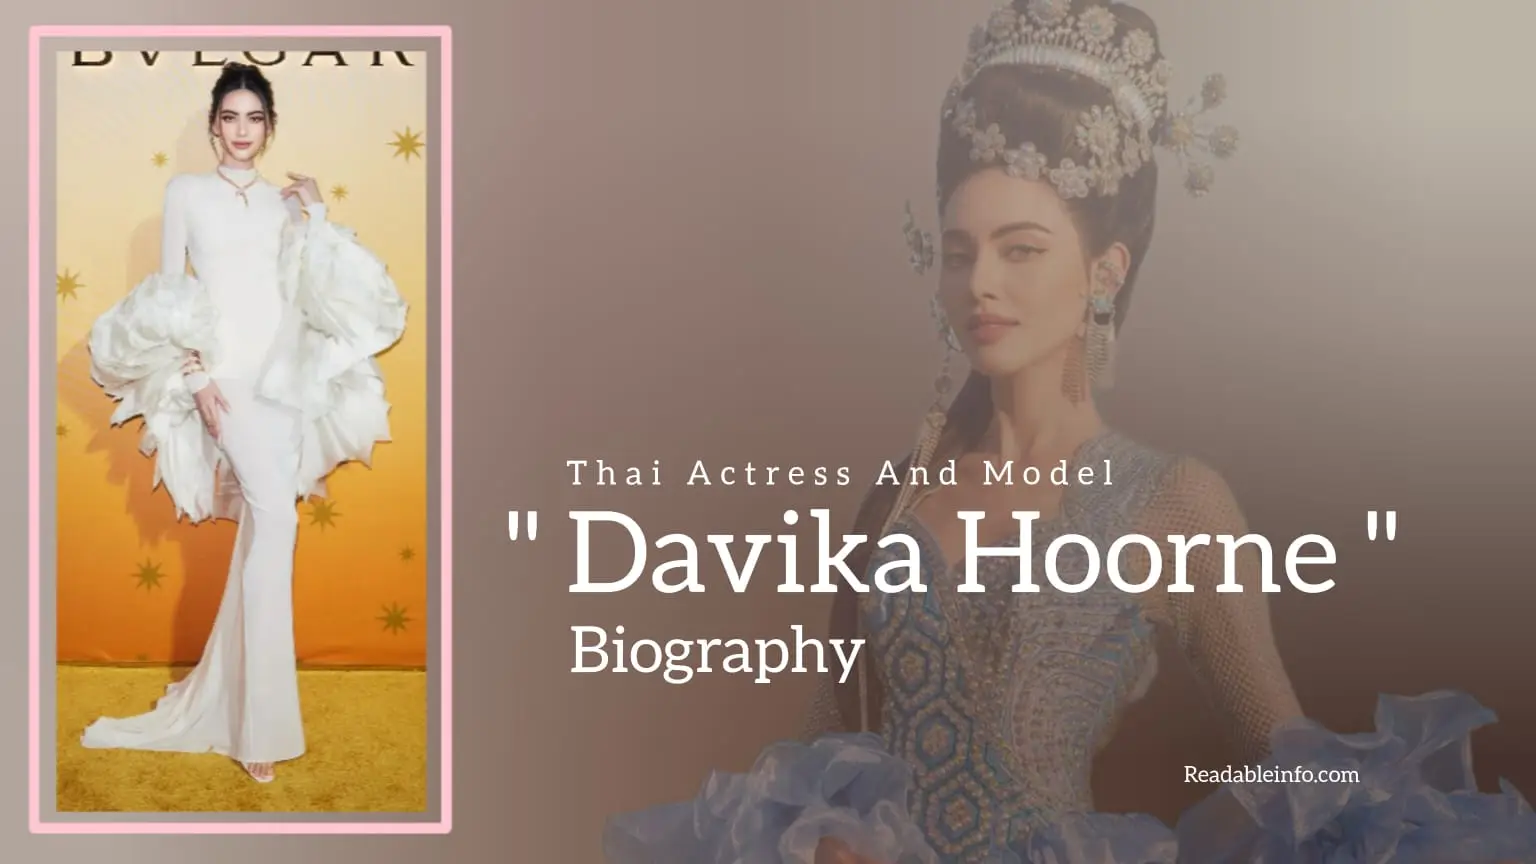 You are currently viewing Davika Hoorne Biography (Thai Actress And Model)